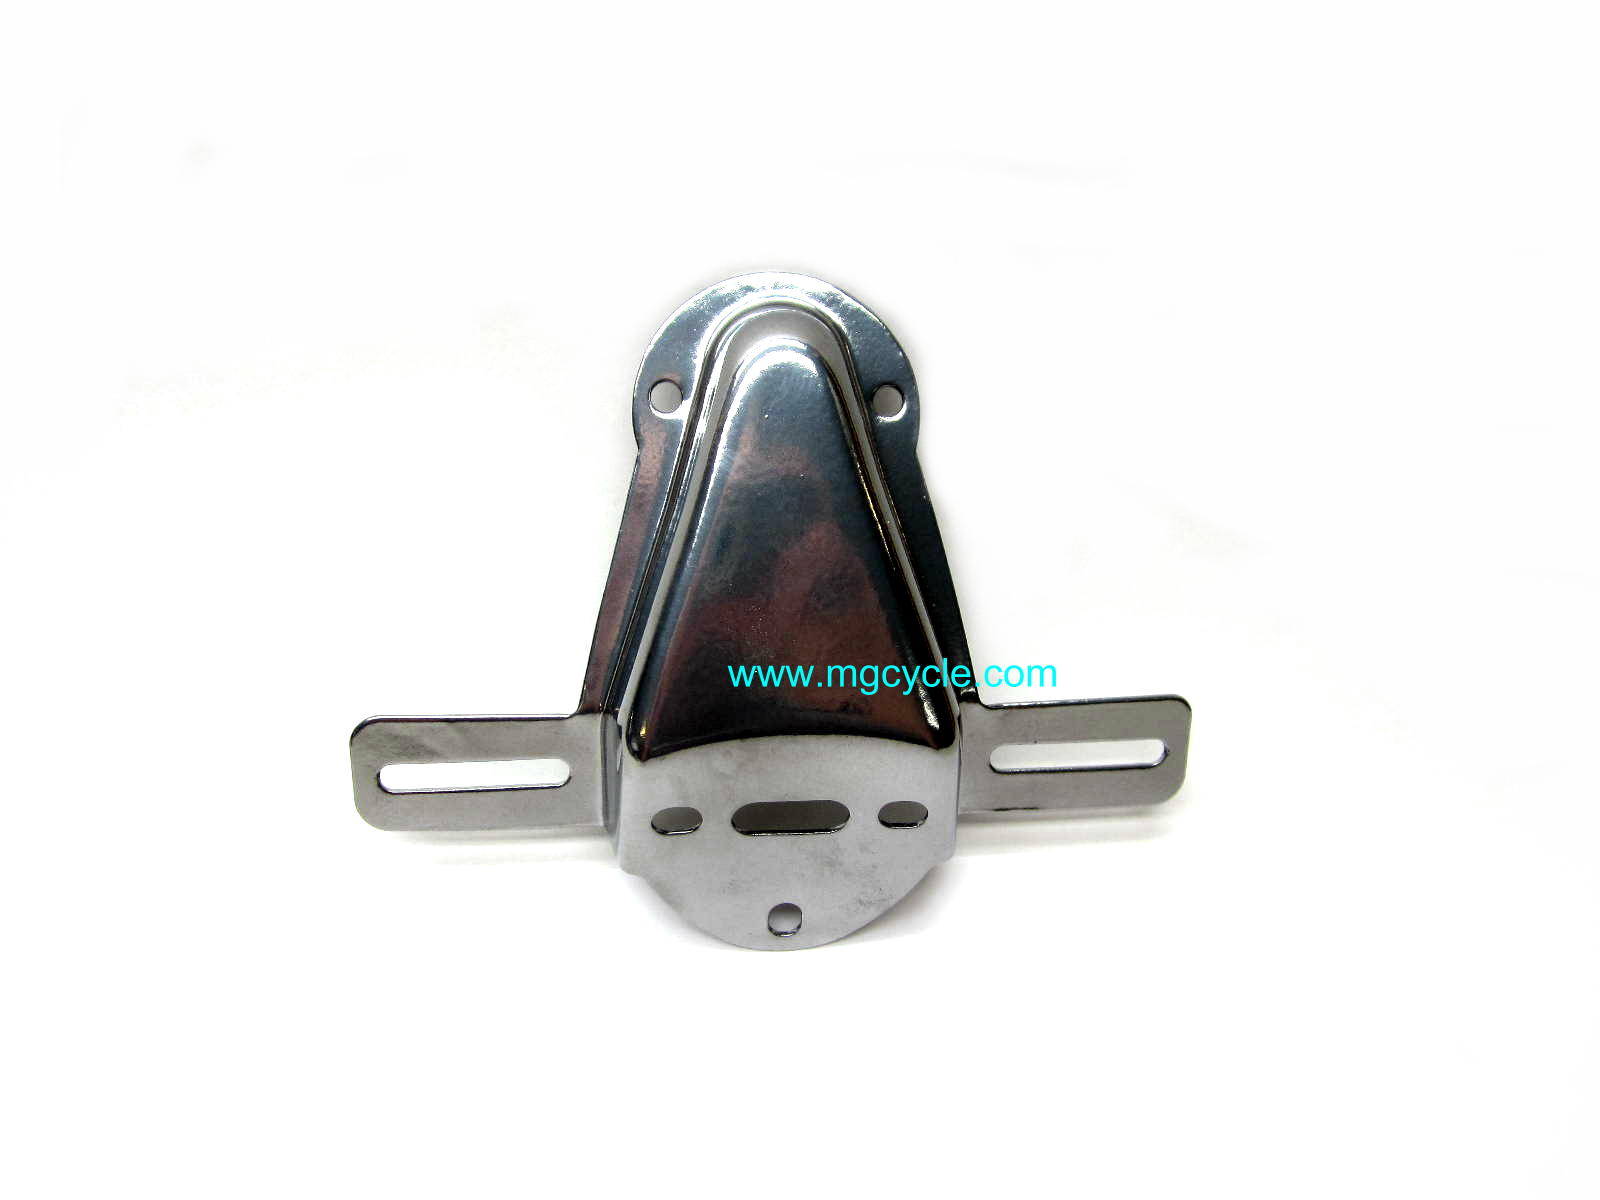 Tail light mounting bracket, as used on CEV tail lights